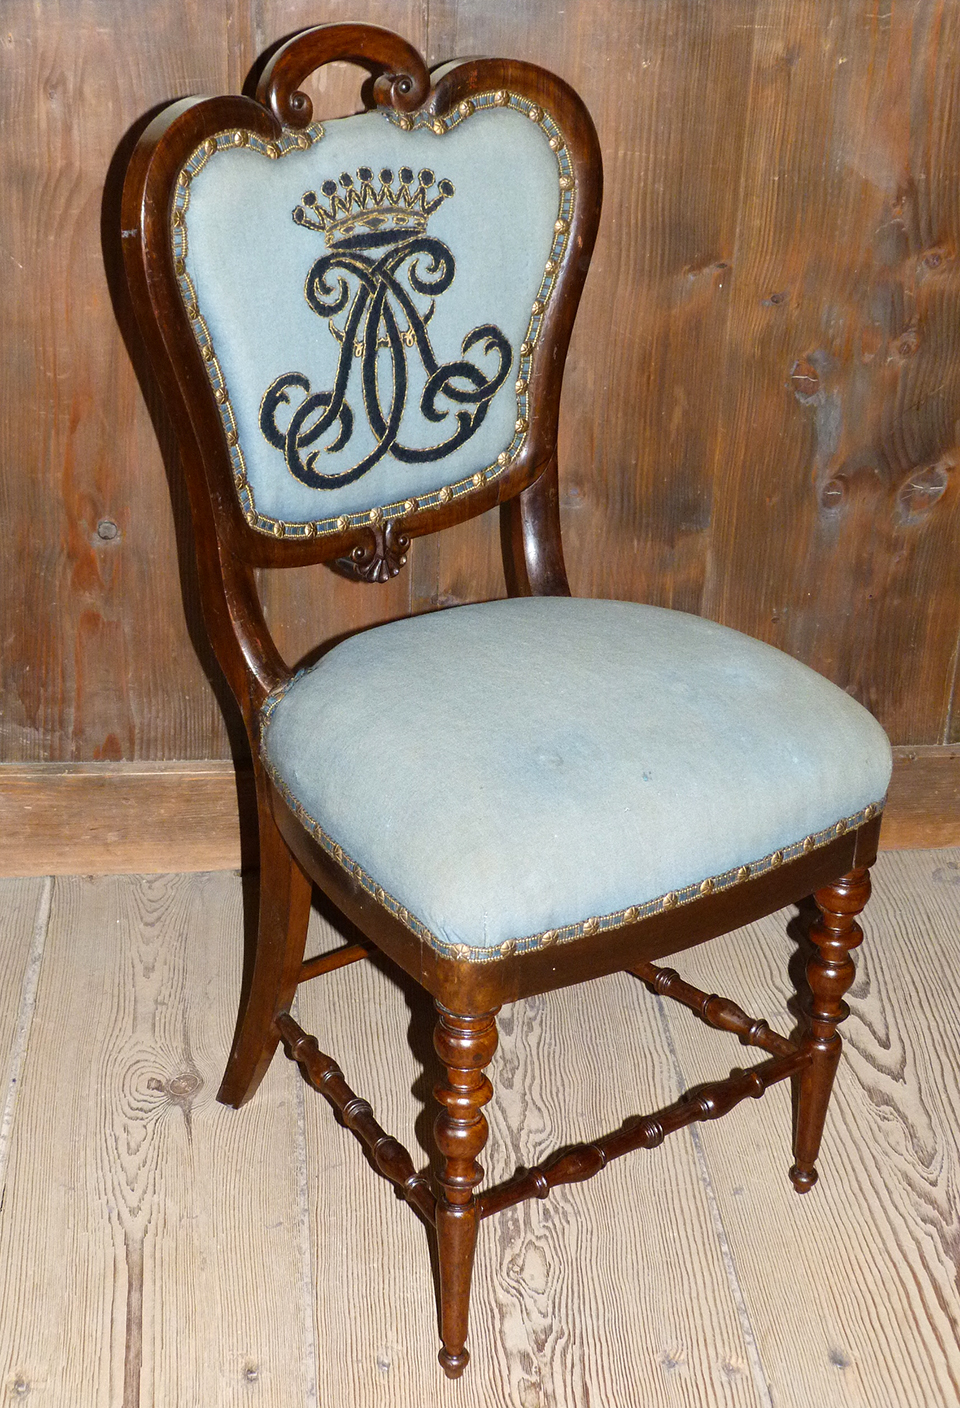 Chair with a woollen cover, white beech, embroidered, Brazilian rosewood veneer, manufacturer unknown, mid-19th century, property of Kulturstiftung Sachsen-Anhalt 